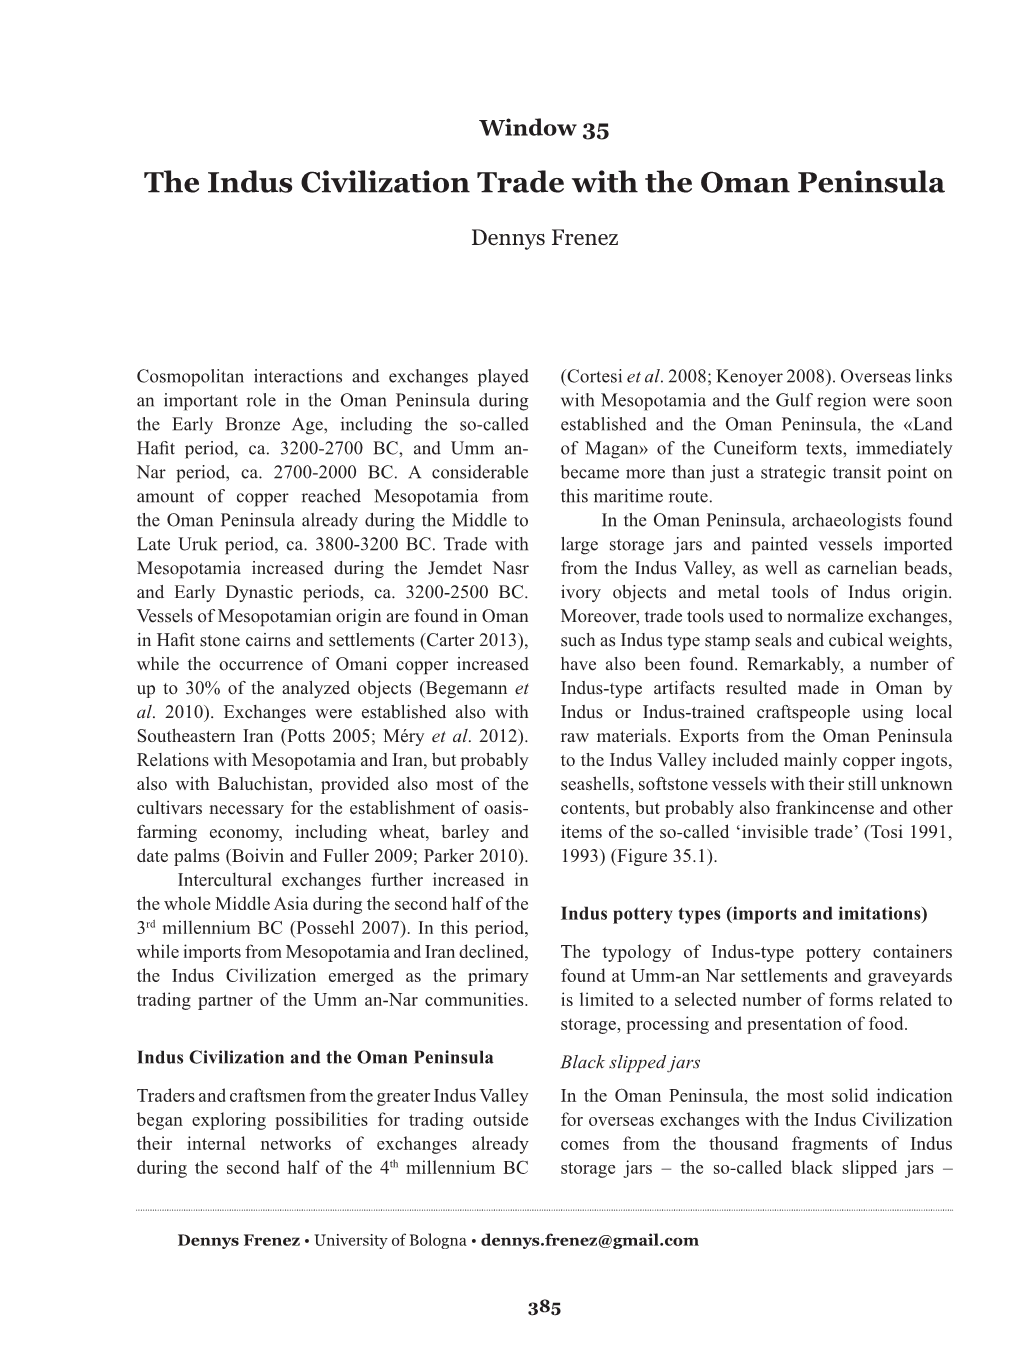 The Indus Civilization Trade with the Oman Peninsula